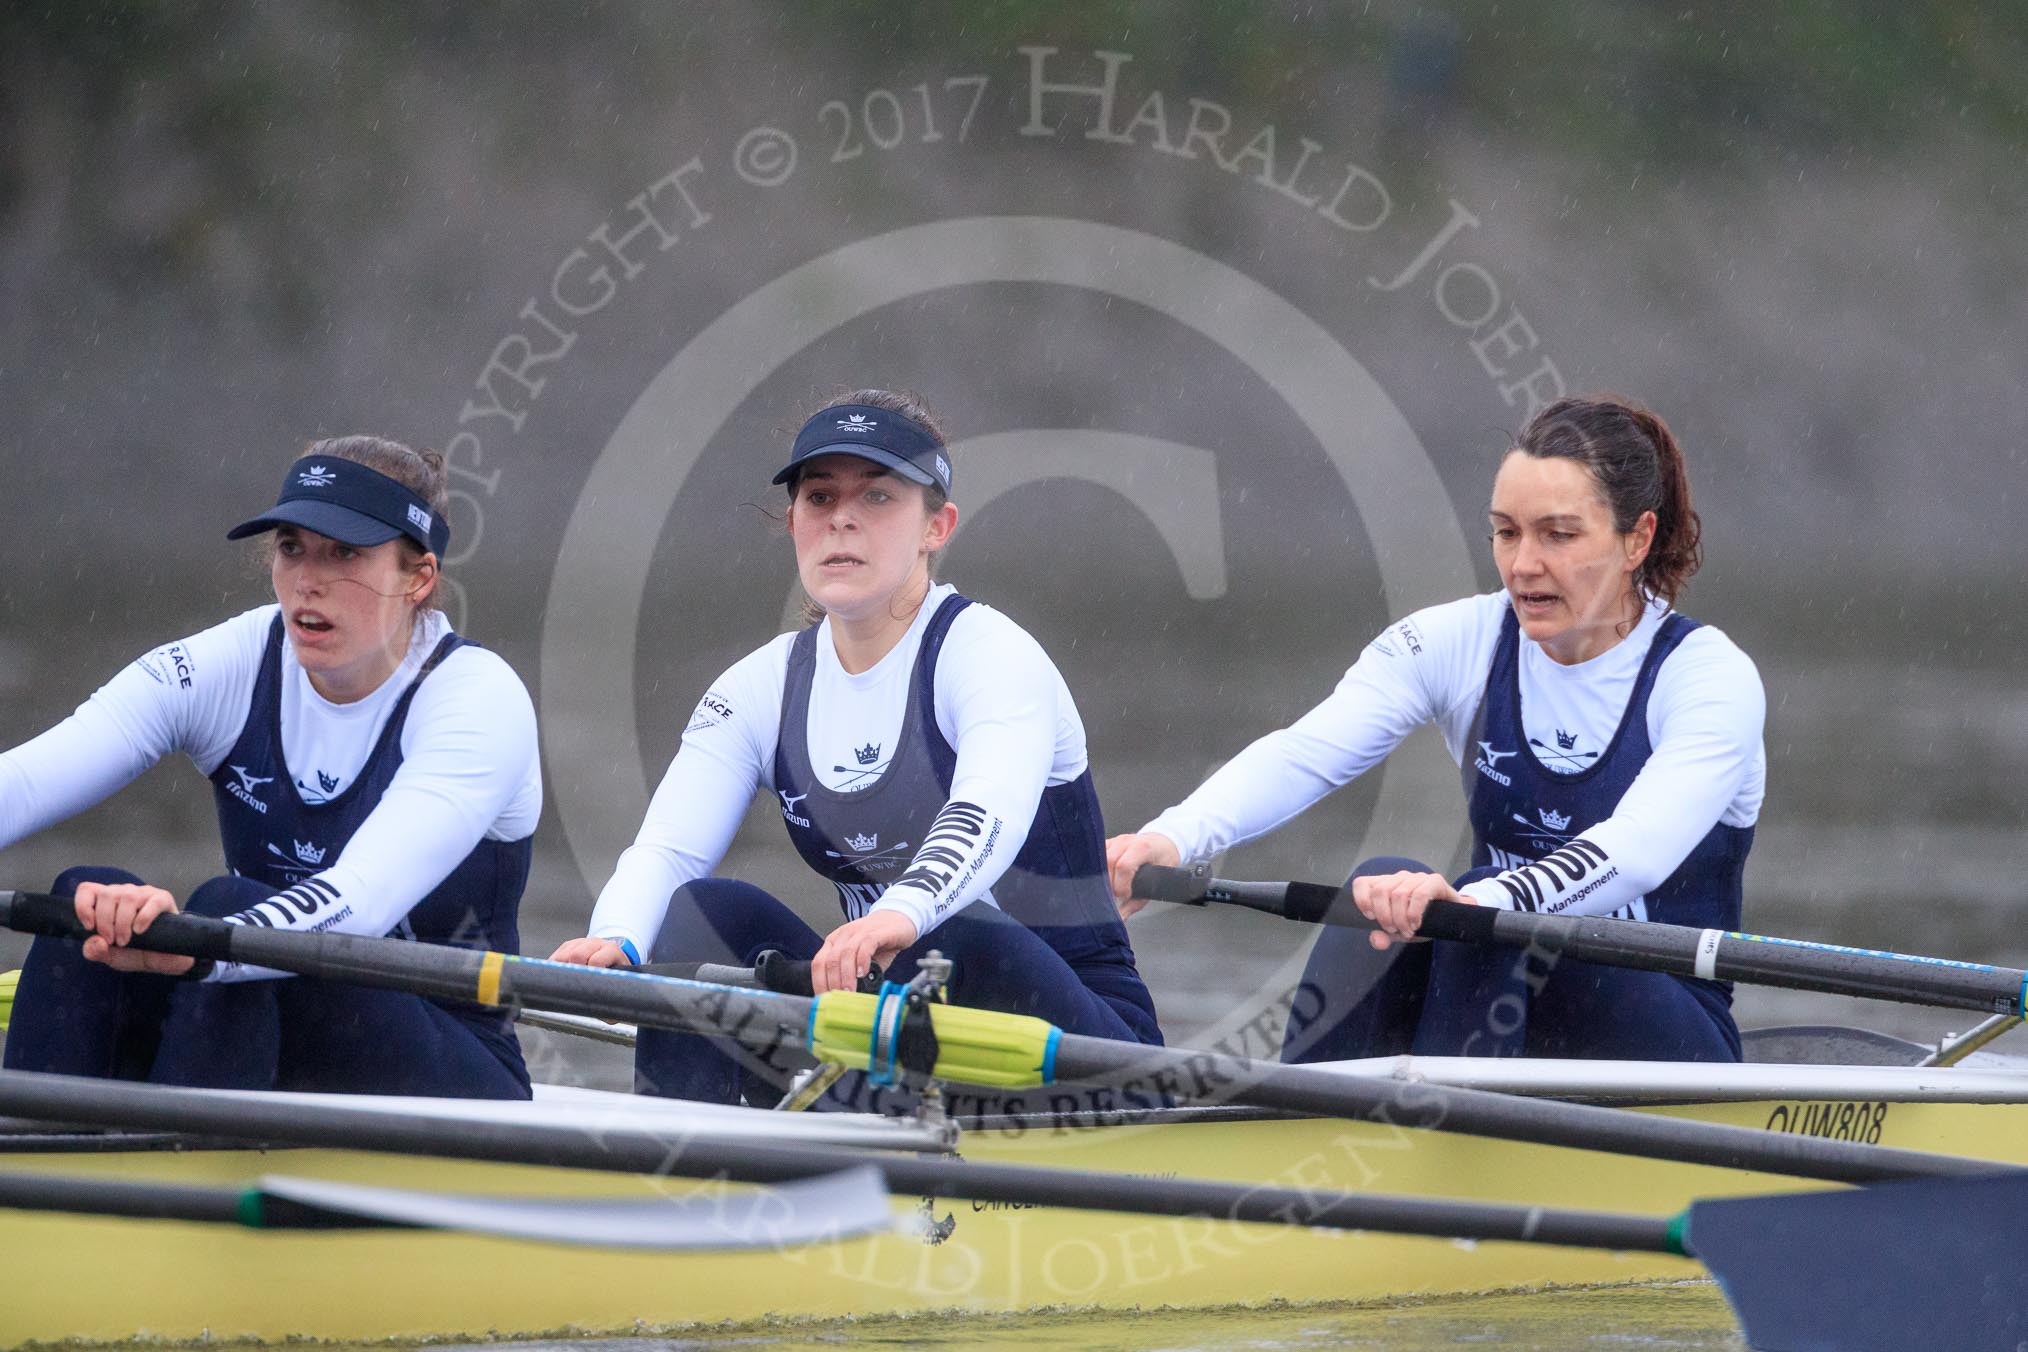 The Boat Race season 2018 - Women's Boat Race Trial Eights (OUWBC, Oxford): "Coursing River" approaching Chiswick Pier - 2 Rachel Anderson, bow Sarah Payne-Riches.
River Thames between Putney Bridge and Mortlake,
London SW15,

United Kingdom,
on 21 January 2018 at 14:39, image #138